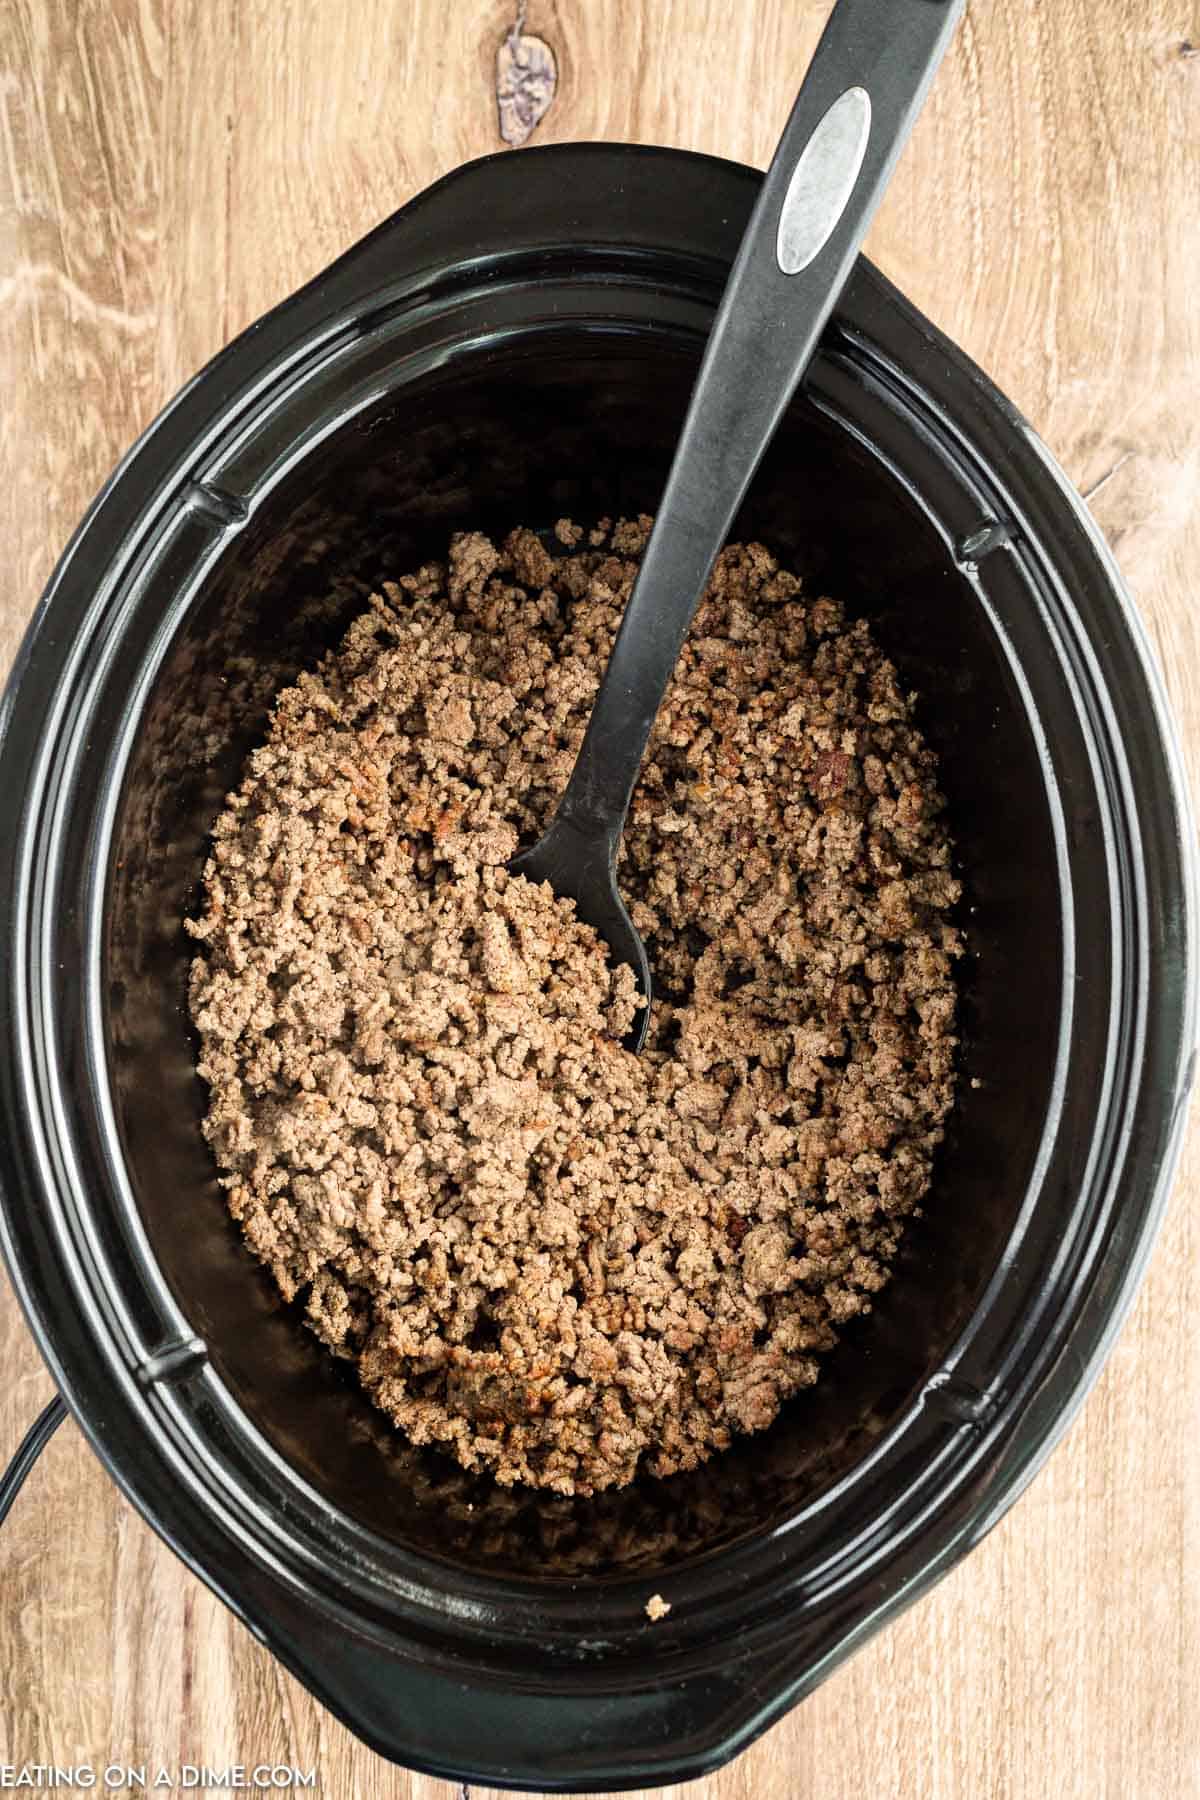 Placing ground beef in the slow cooker with a spoon